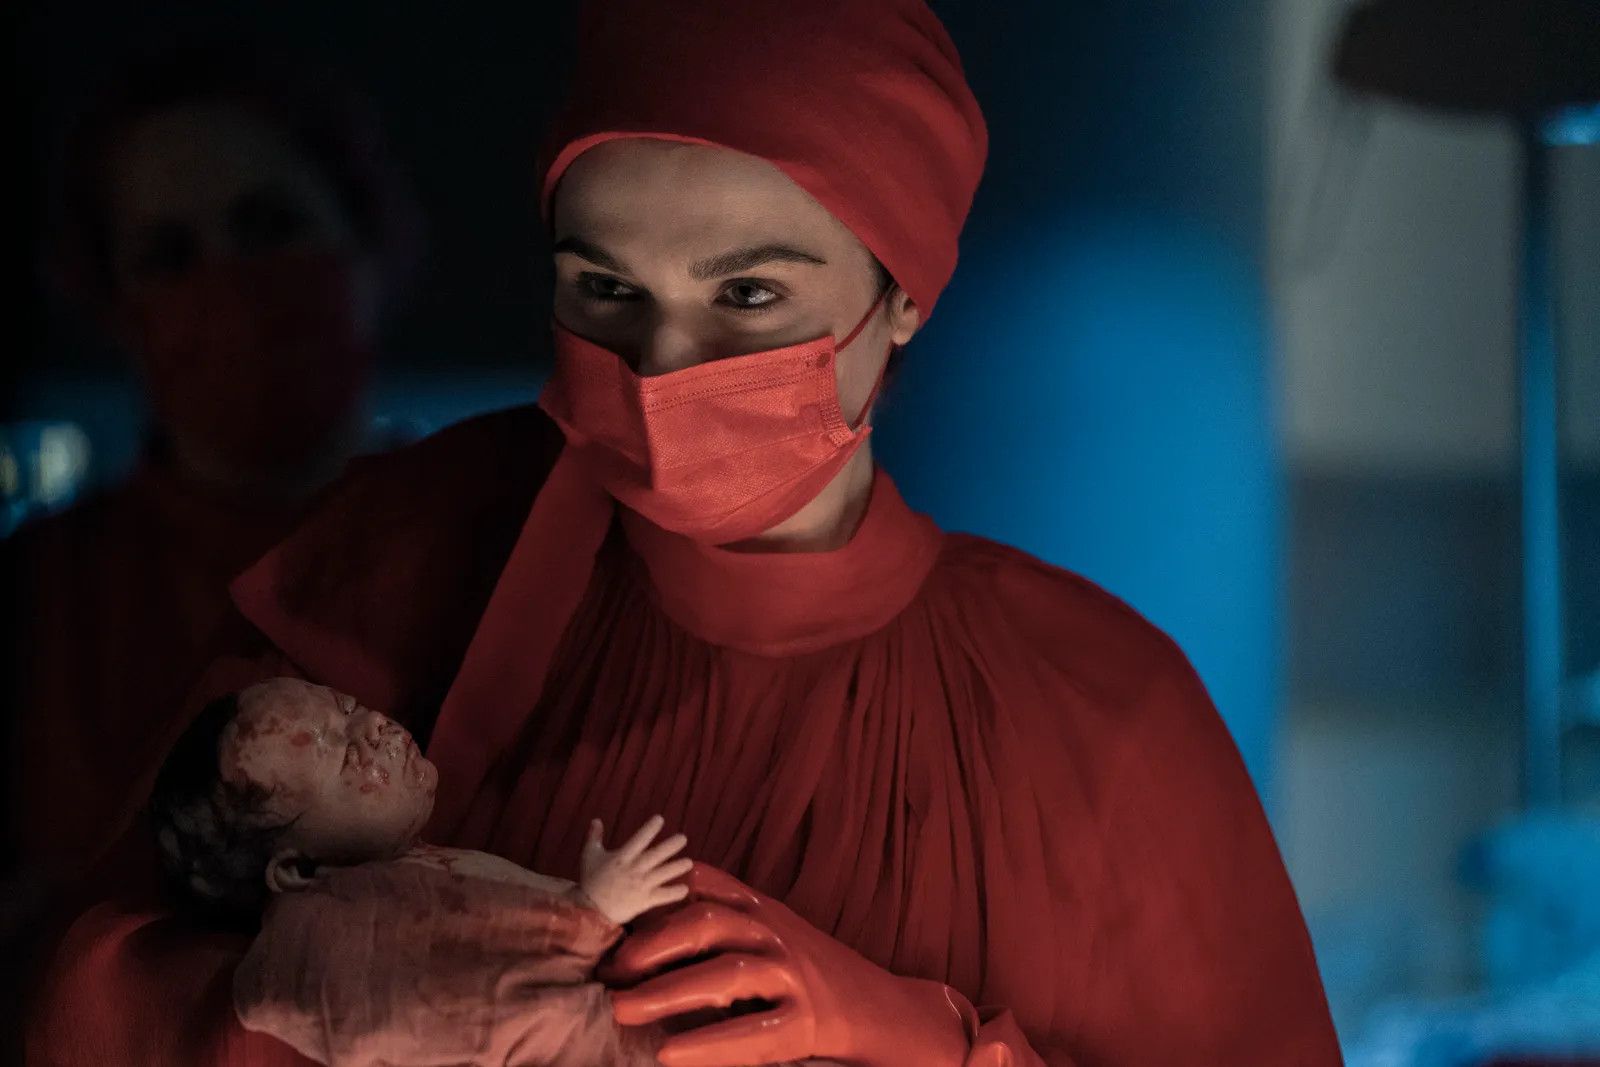 Rachel Weisz in Dead Ringers in a red surgeon's gown holding a newborn baby